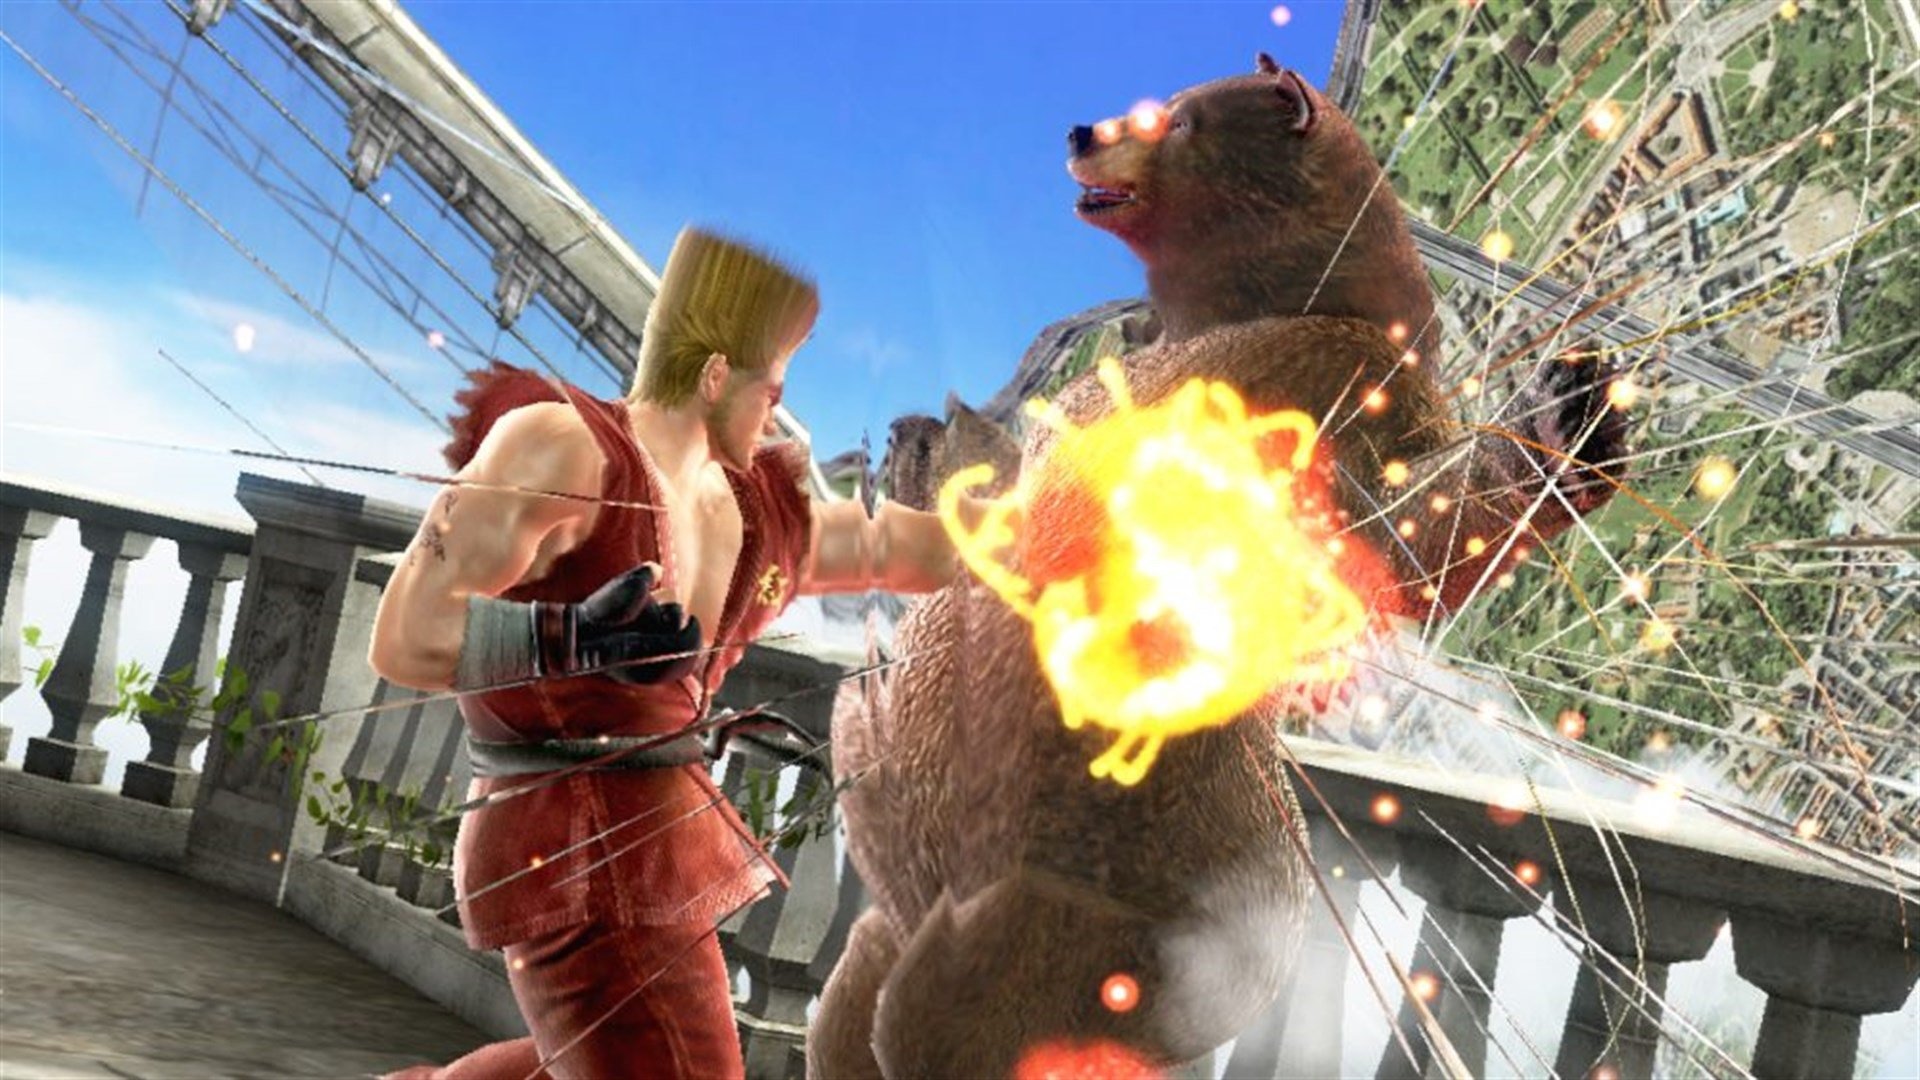 Tekken 8 announced for PS5, Xbox Series, and PC - Gematsu